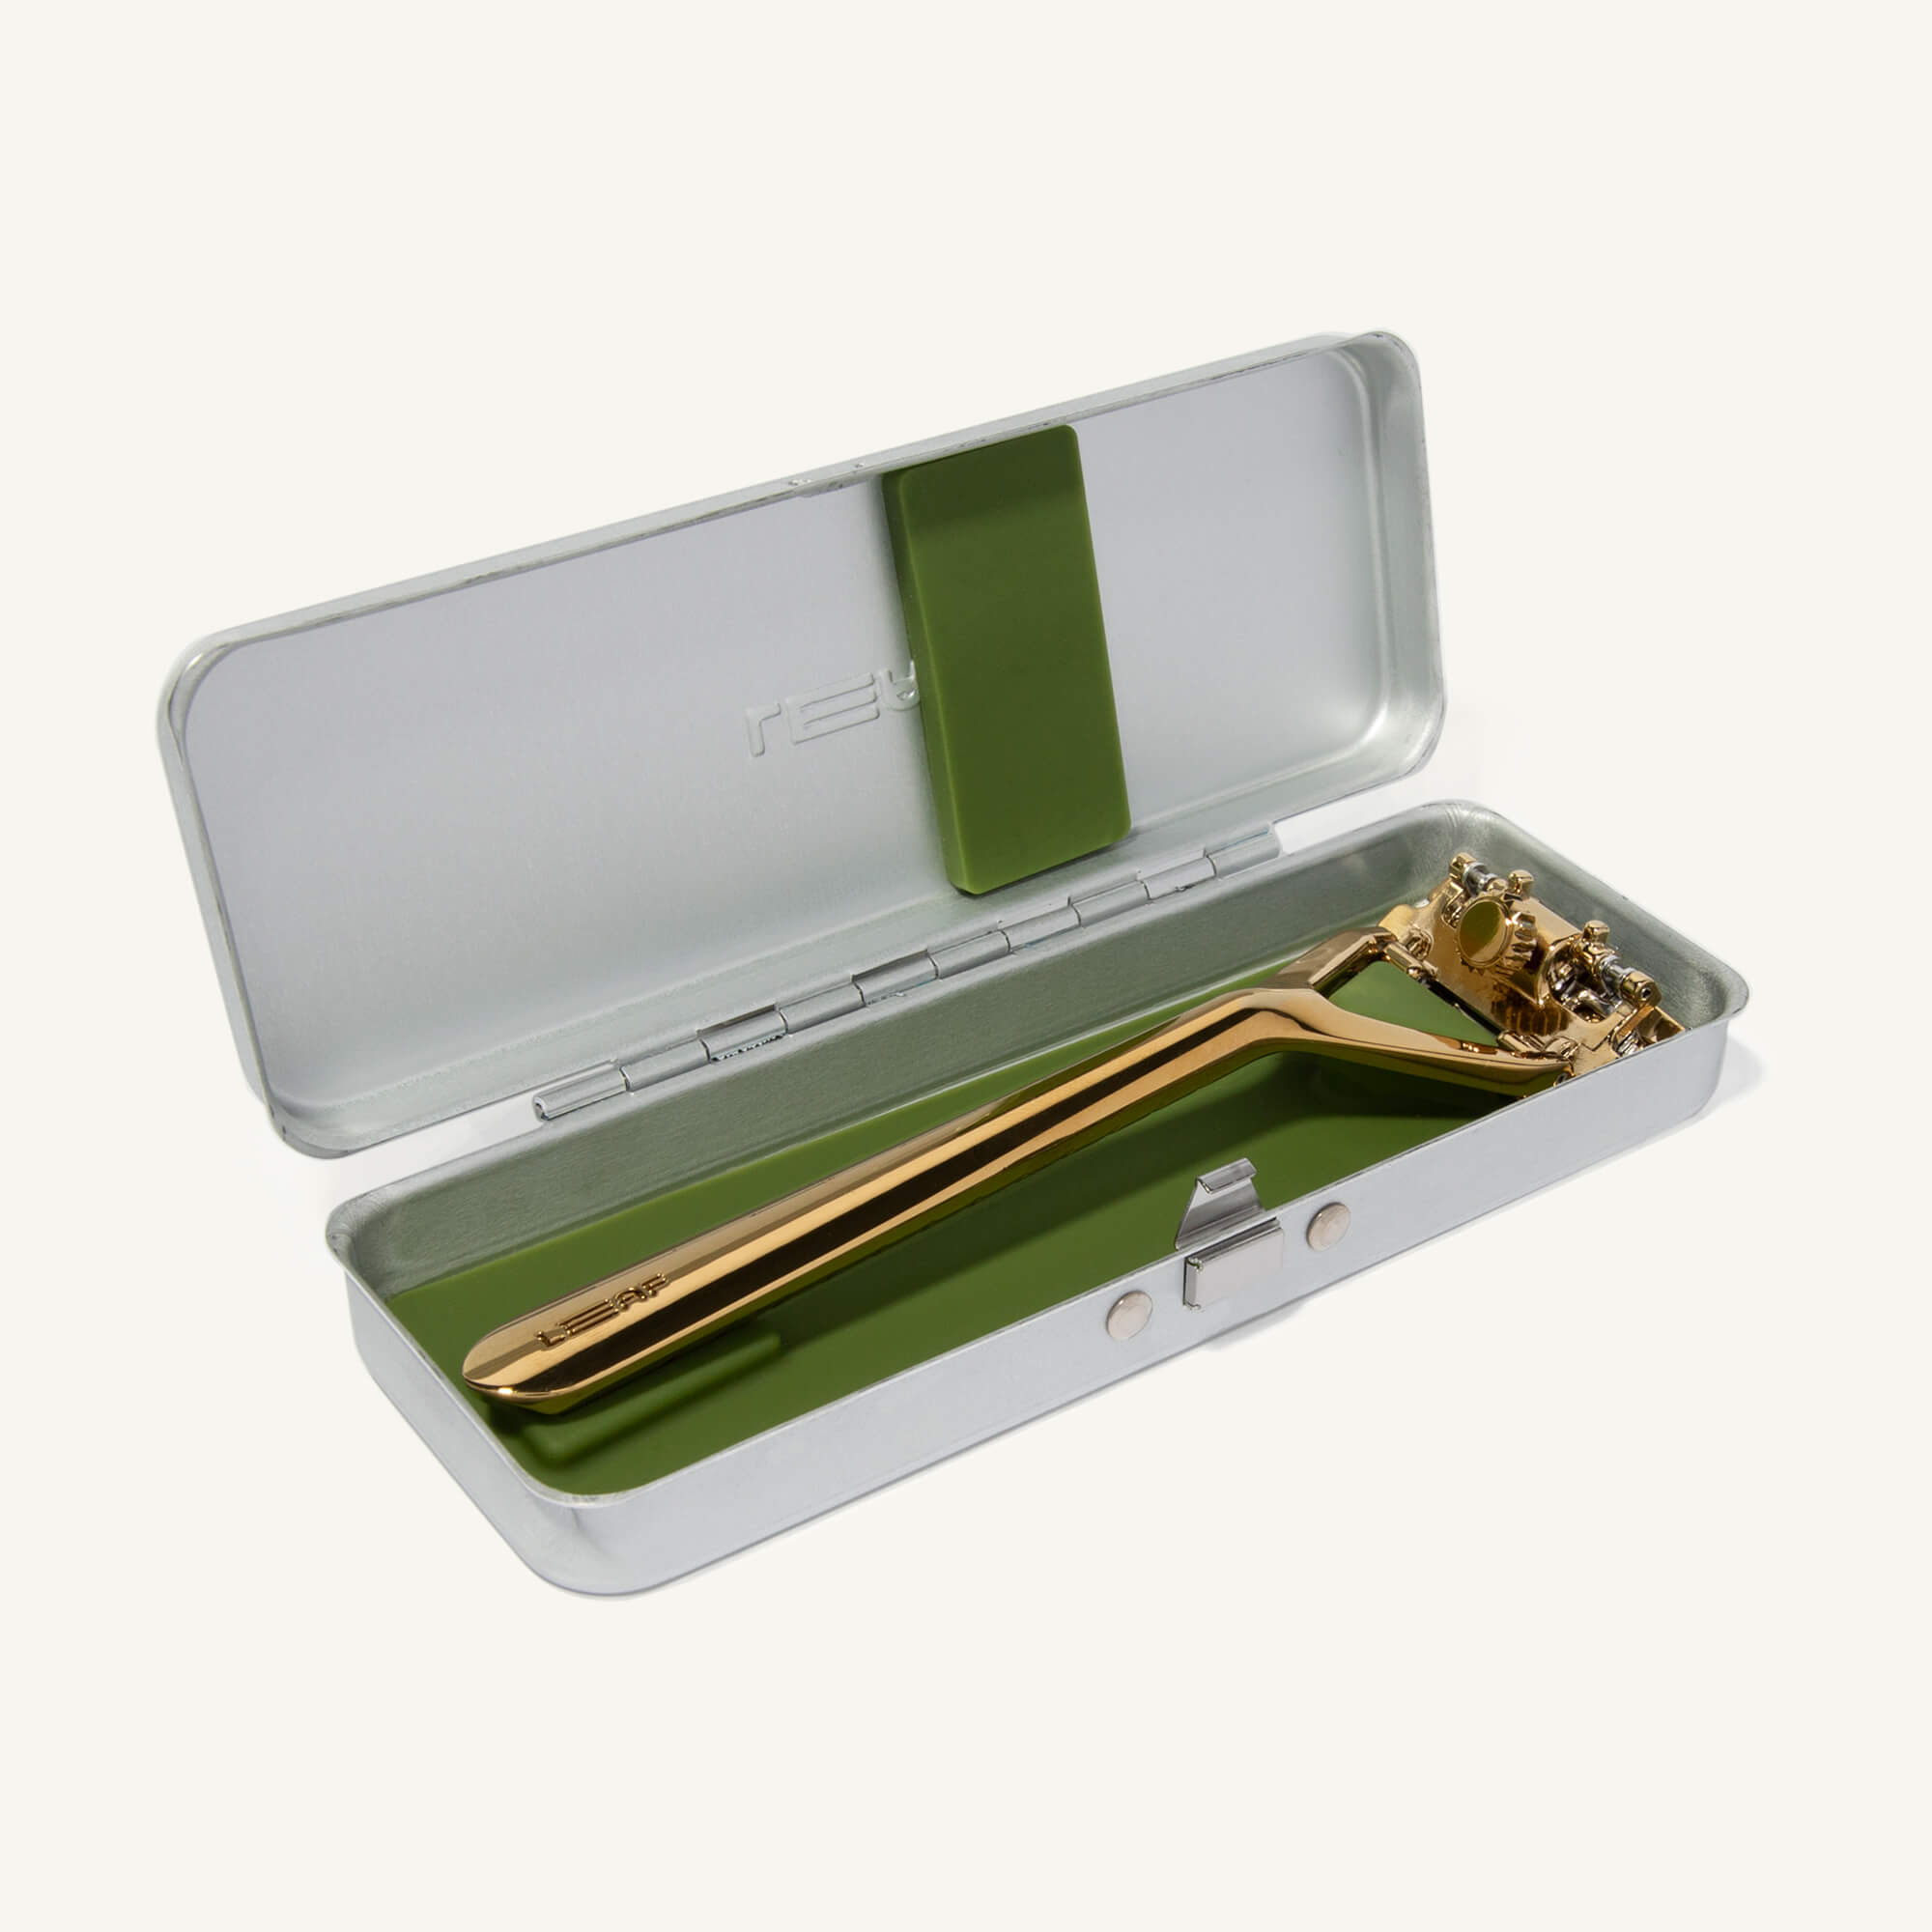 Silver case, open, with green silicone insert and a gold razor laying inside it.